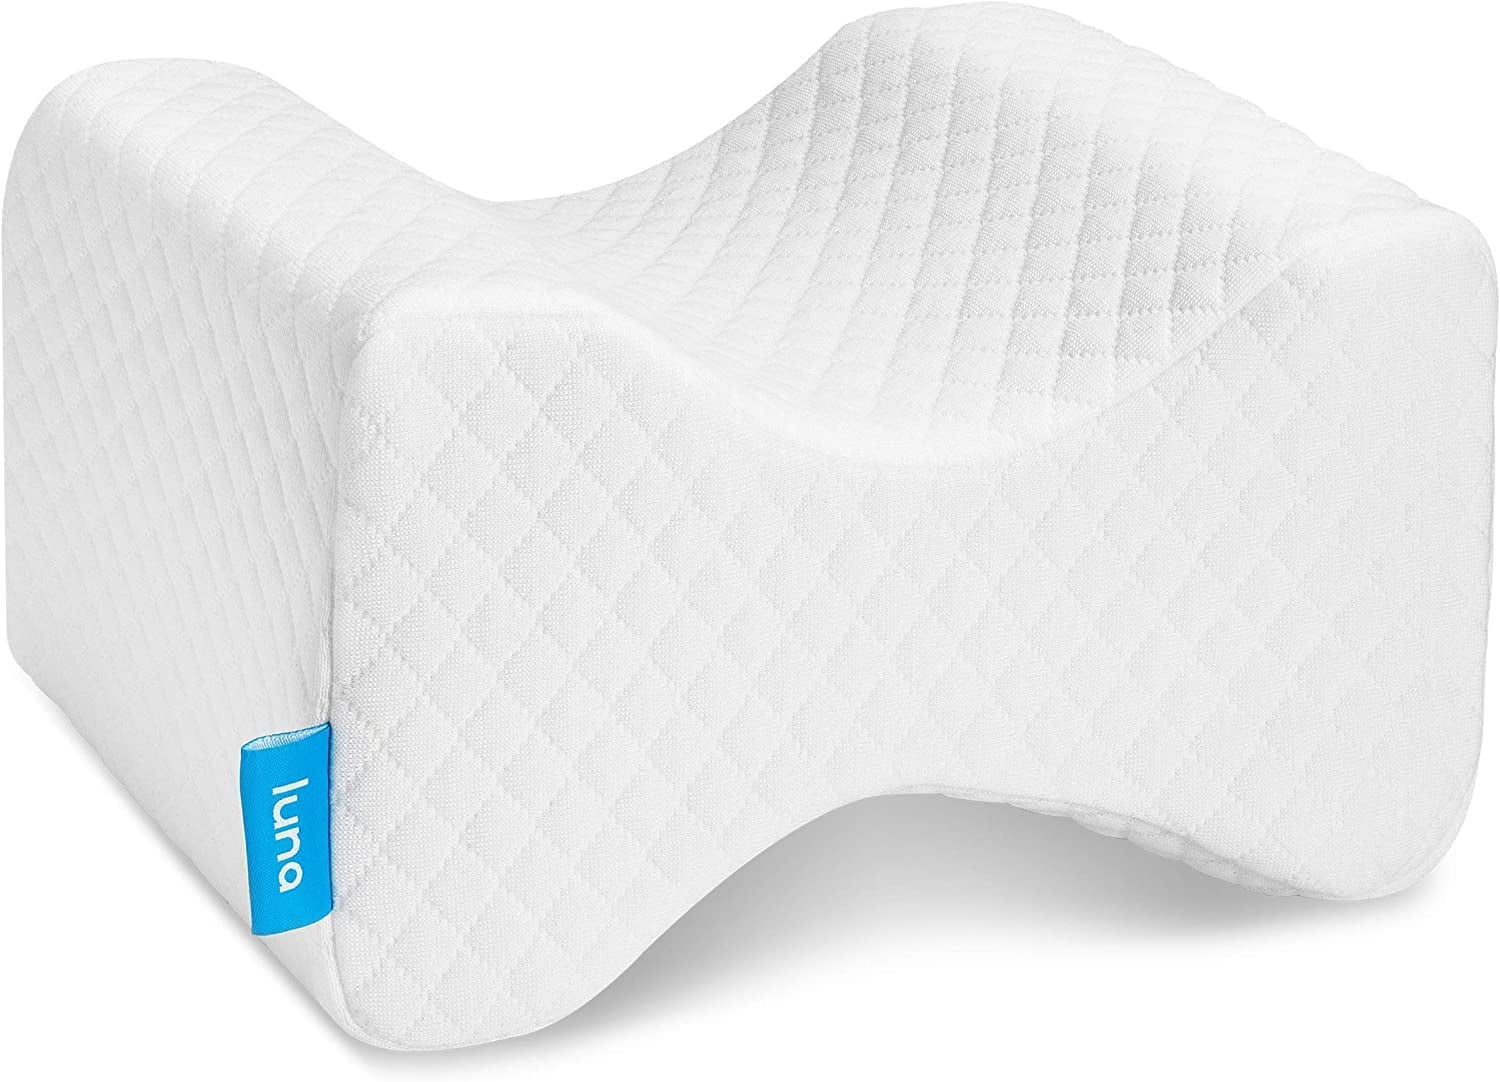 SelectSoma Knee Pillow for Side Sleepers - Cooling Memory Foam Leg Pillow  for Sleeping - Leg & Knee Foam Support Pillow - Soothing Pain Relief for